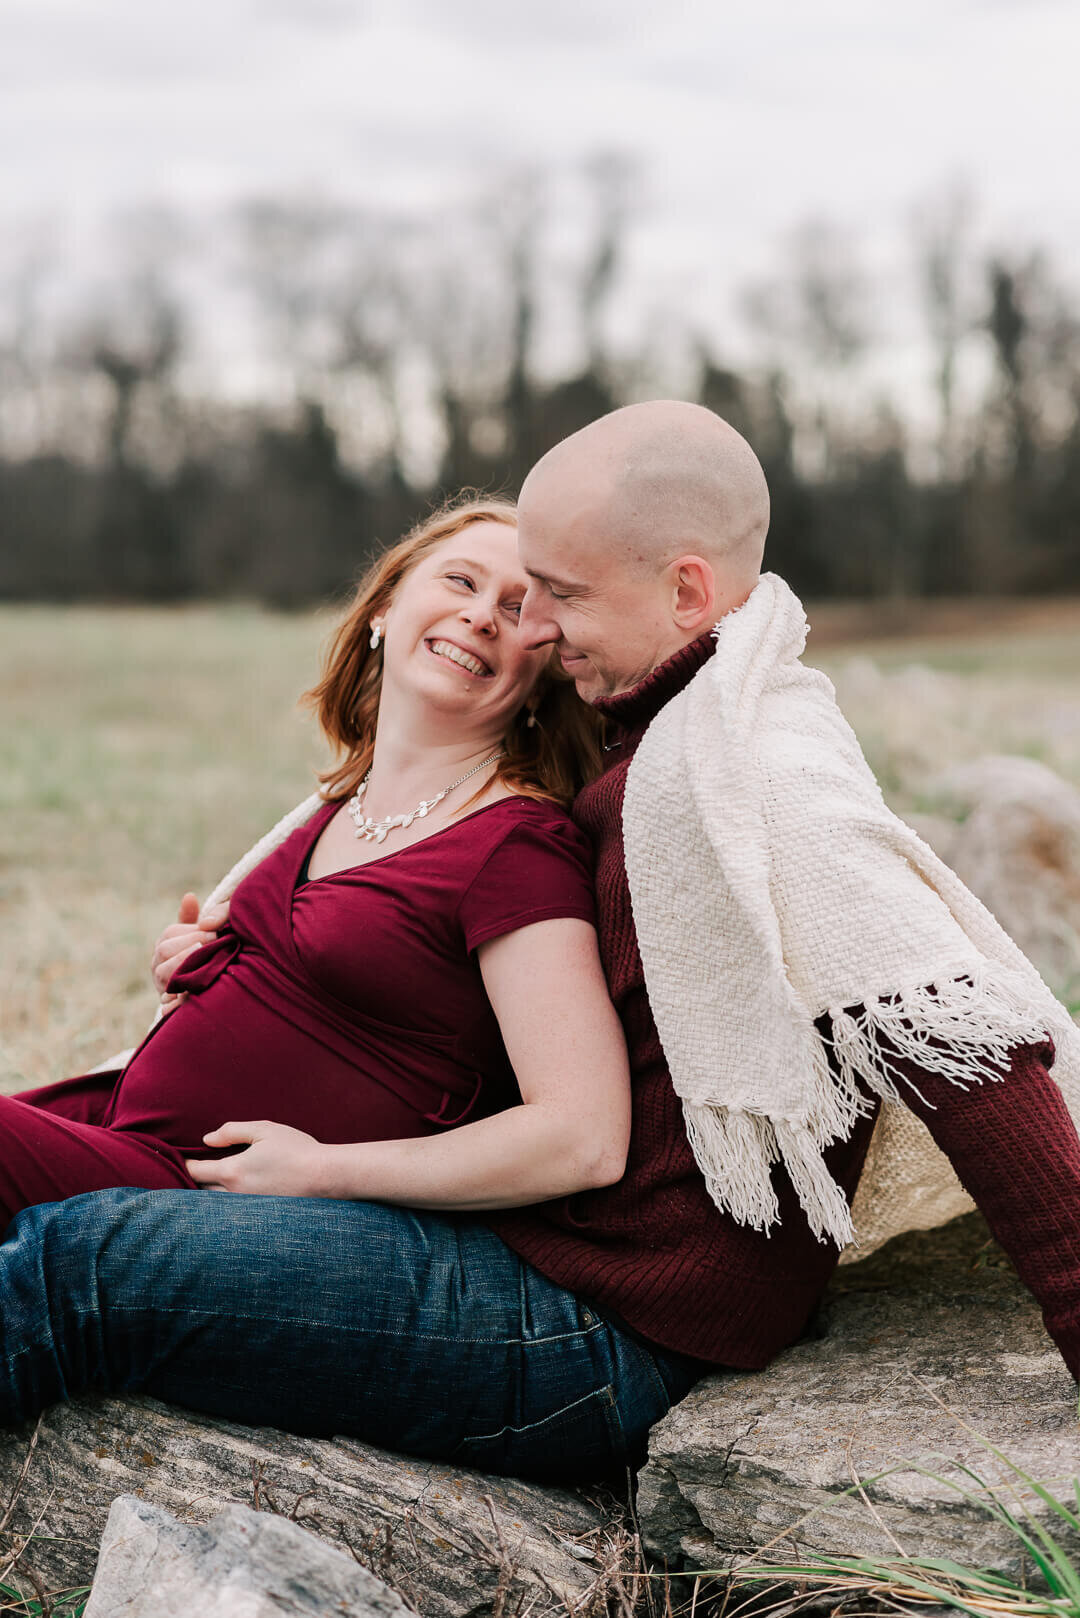 An expecting mom smiling happily at her partner, taken by a northern virginia maternity photographer